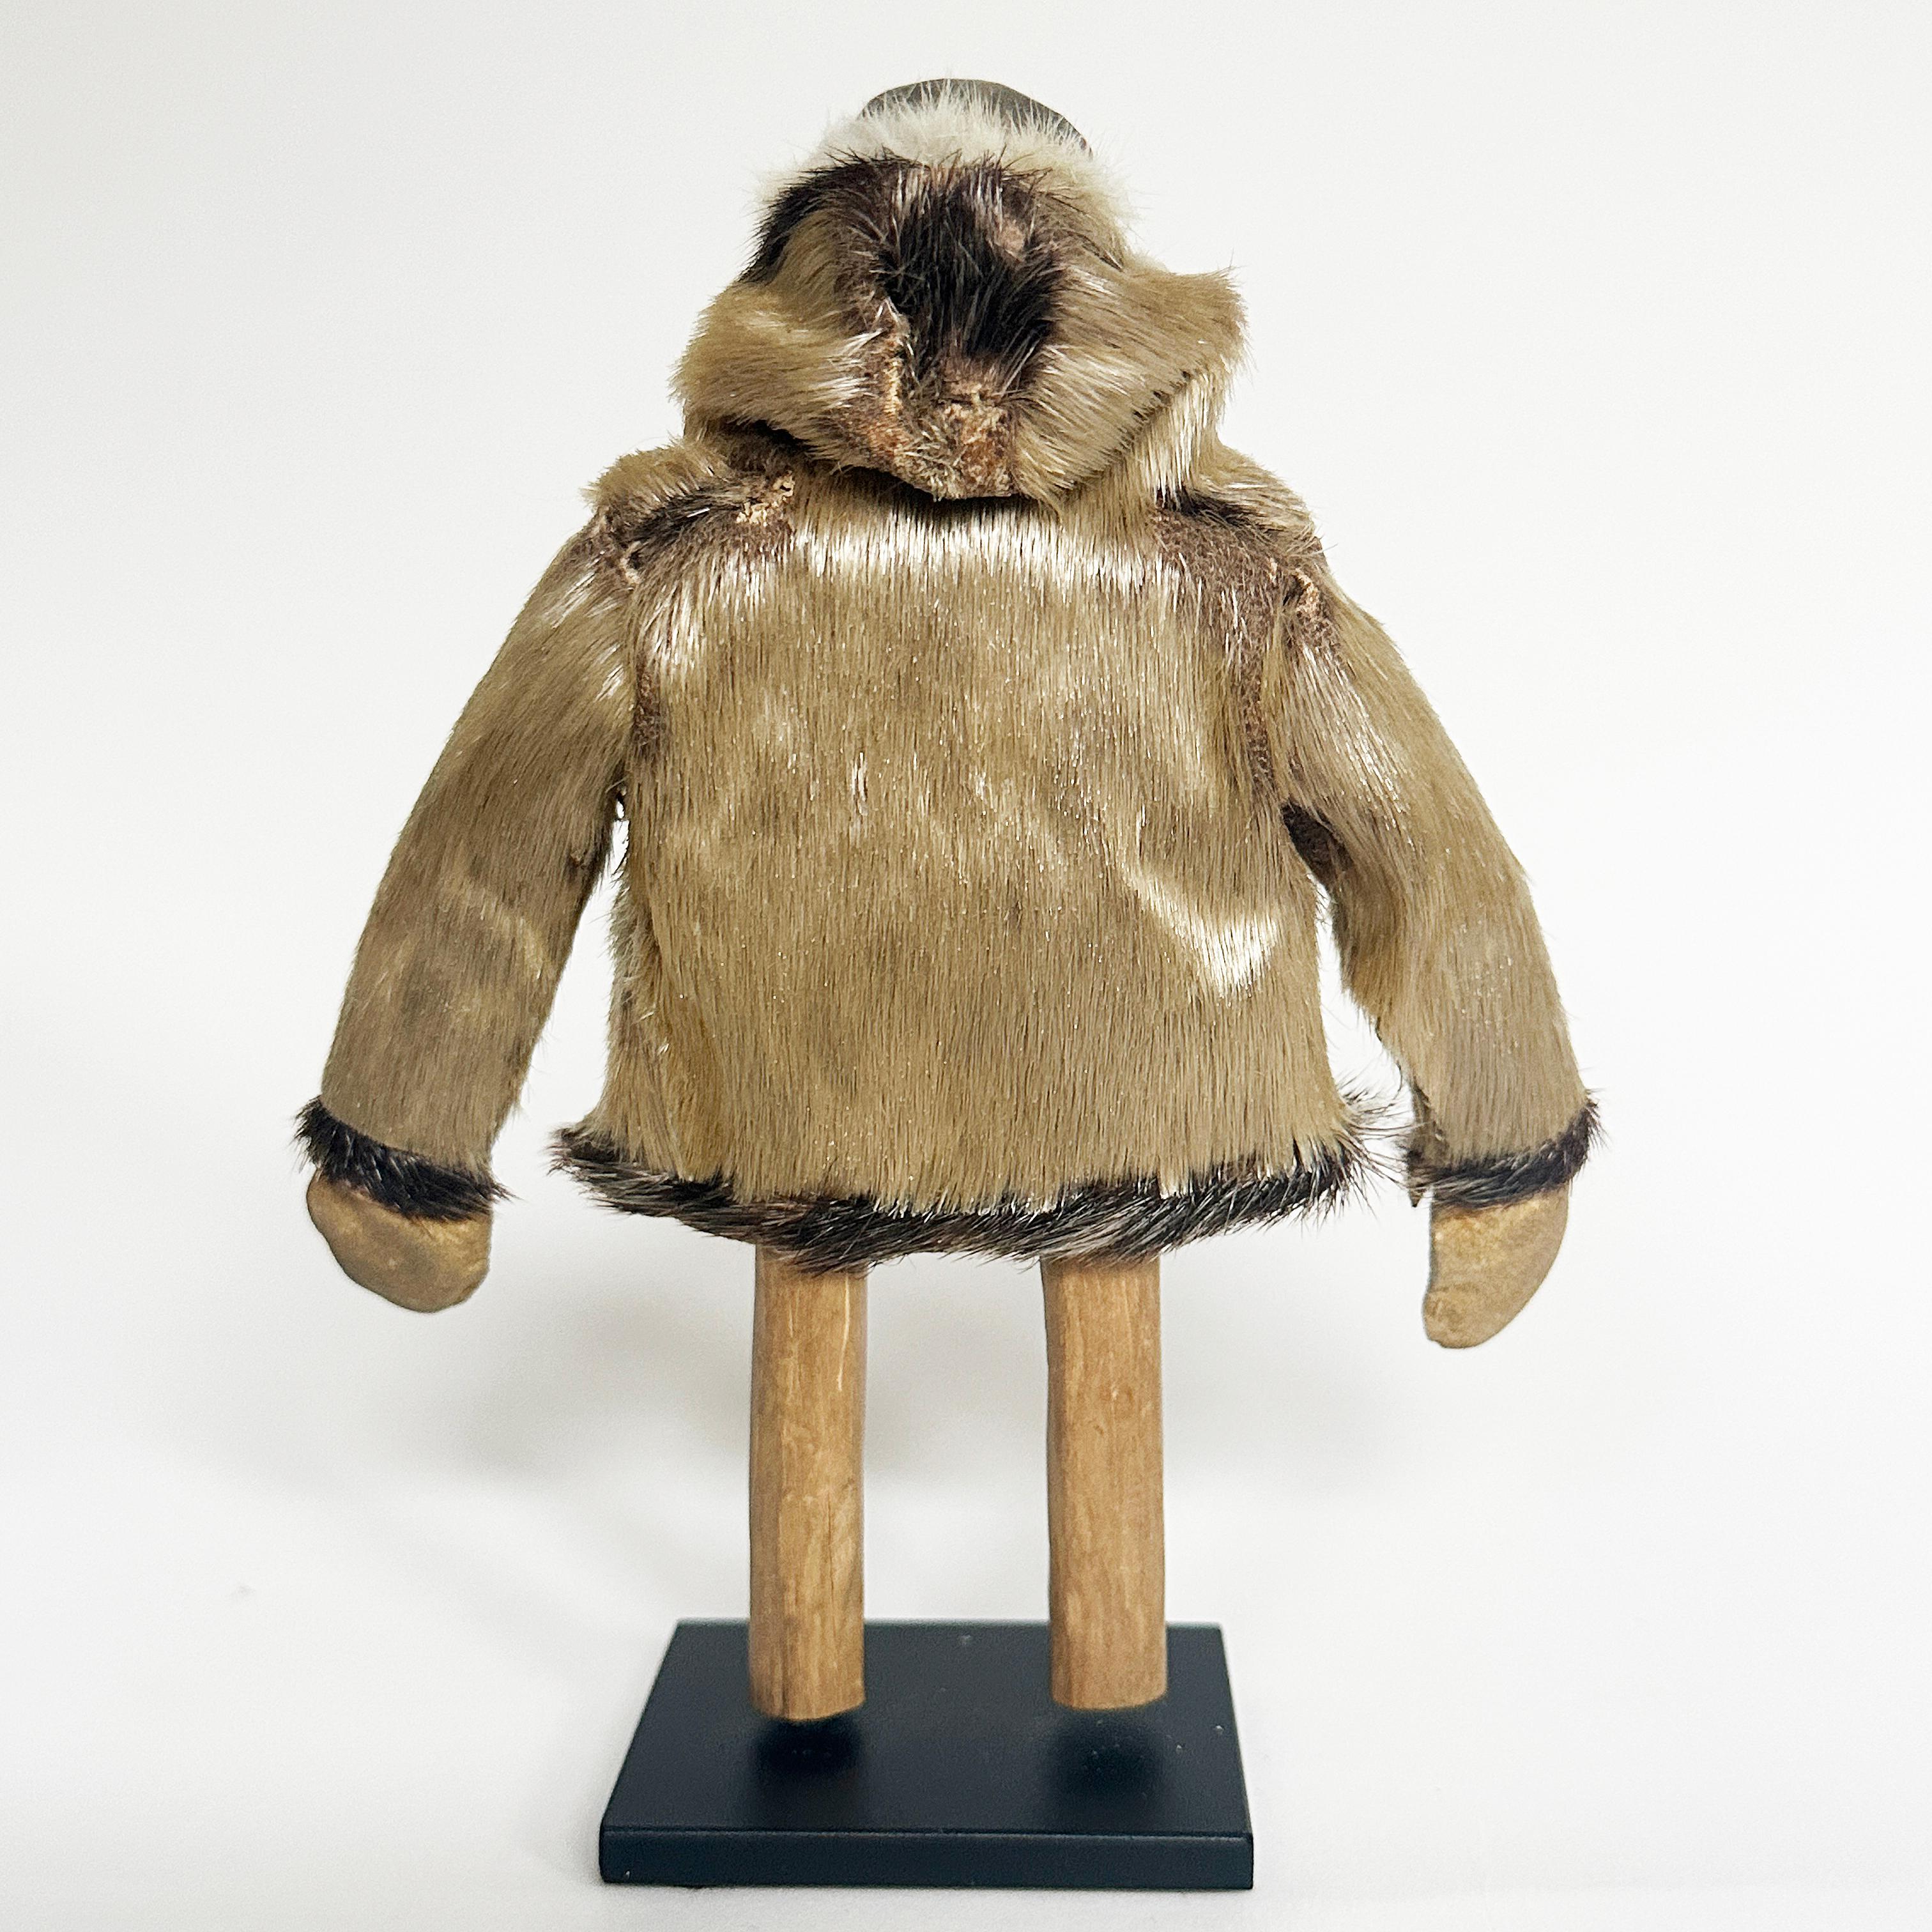 Eskimo wood carving of a man with seal coat, North Coast, 20th century

Crude carving of a man dressed in a seal coat. This miniature sculpture is shown standing in a contemporary metal stand, which measures 2.5 x 2 inches. The purpose of this